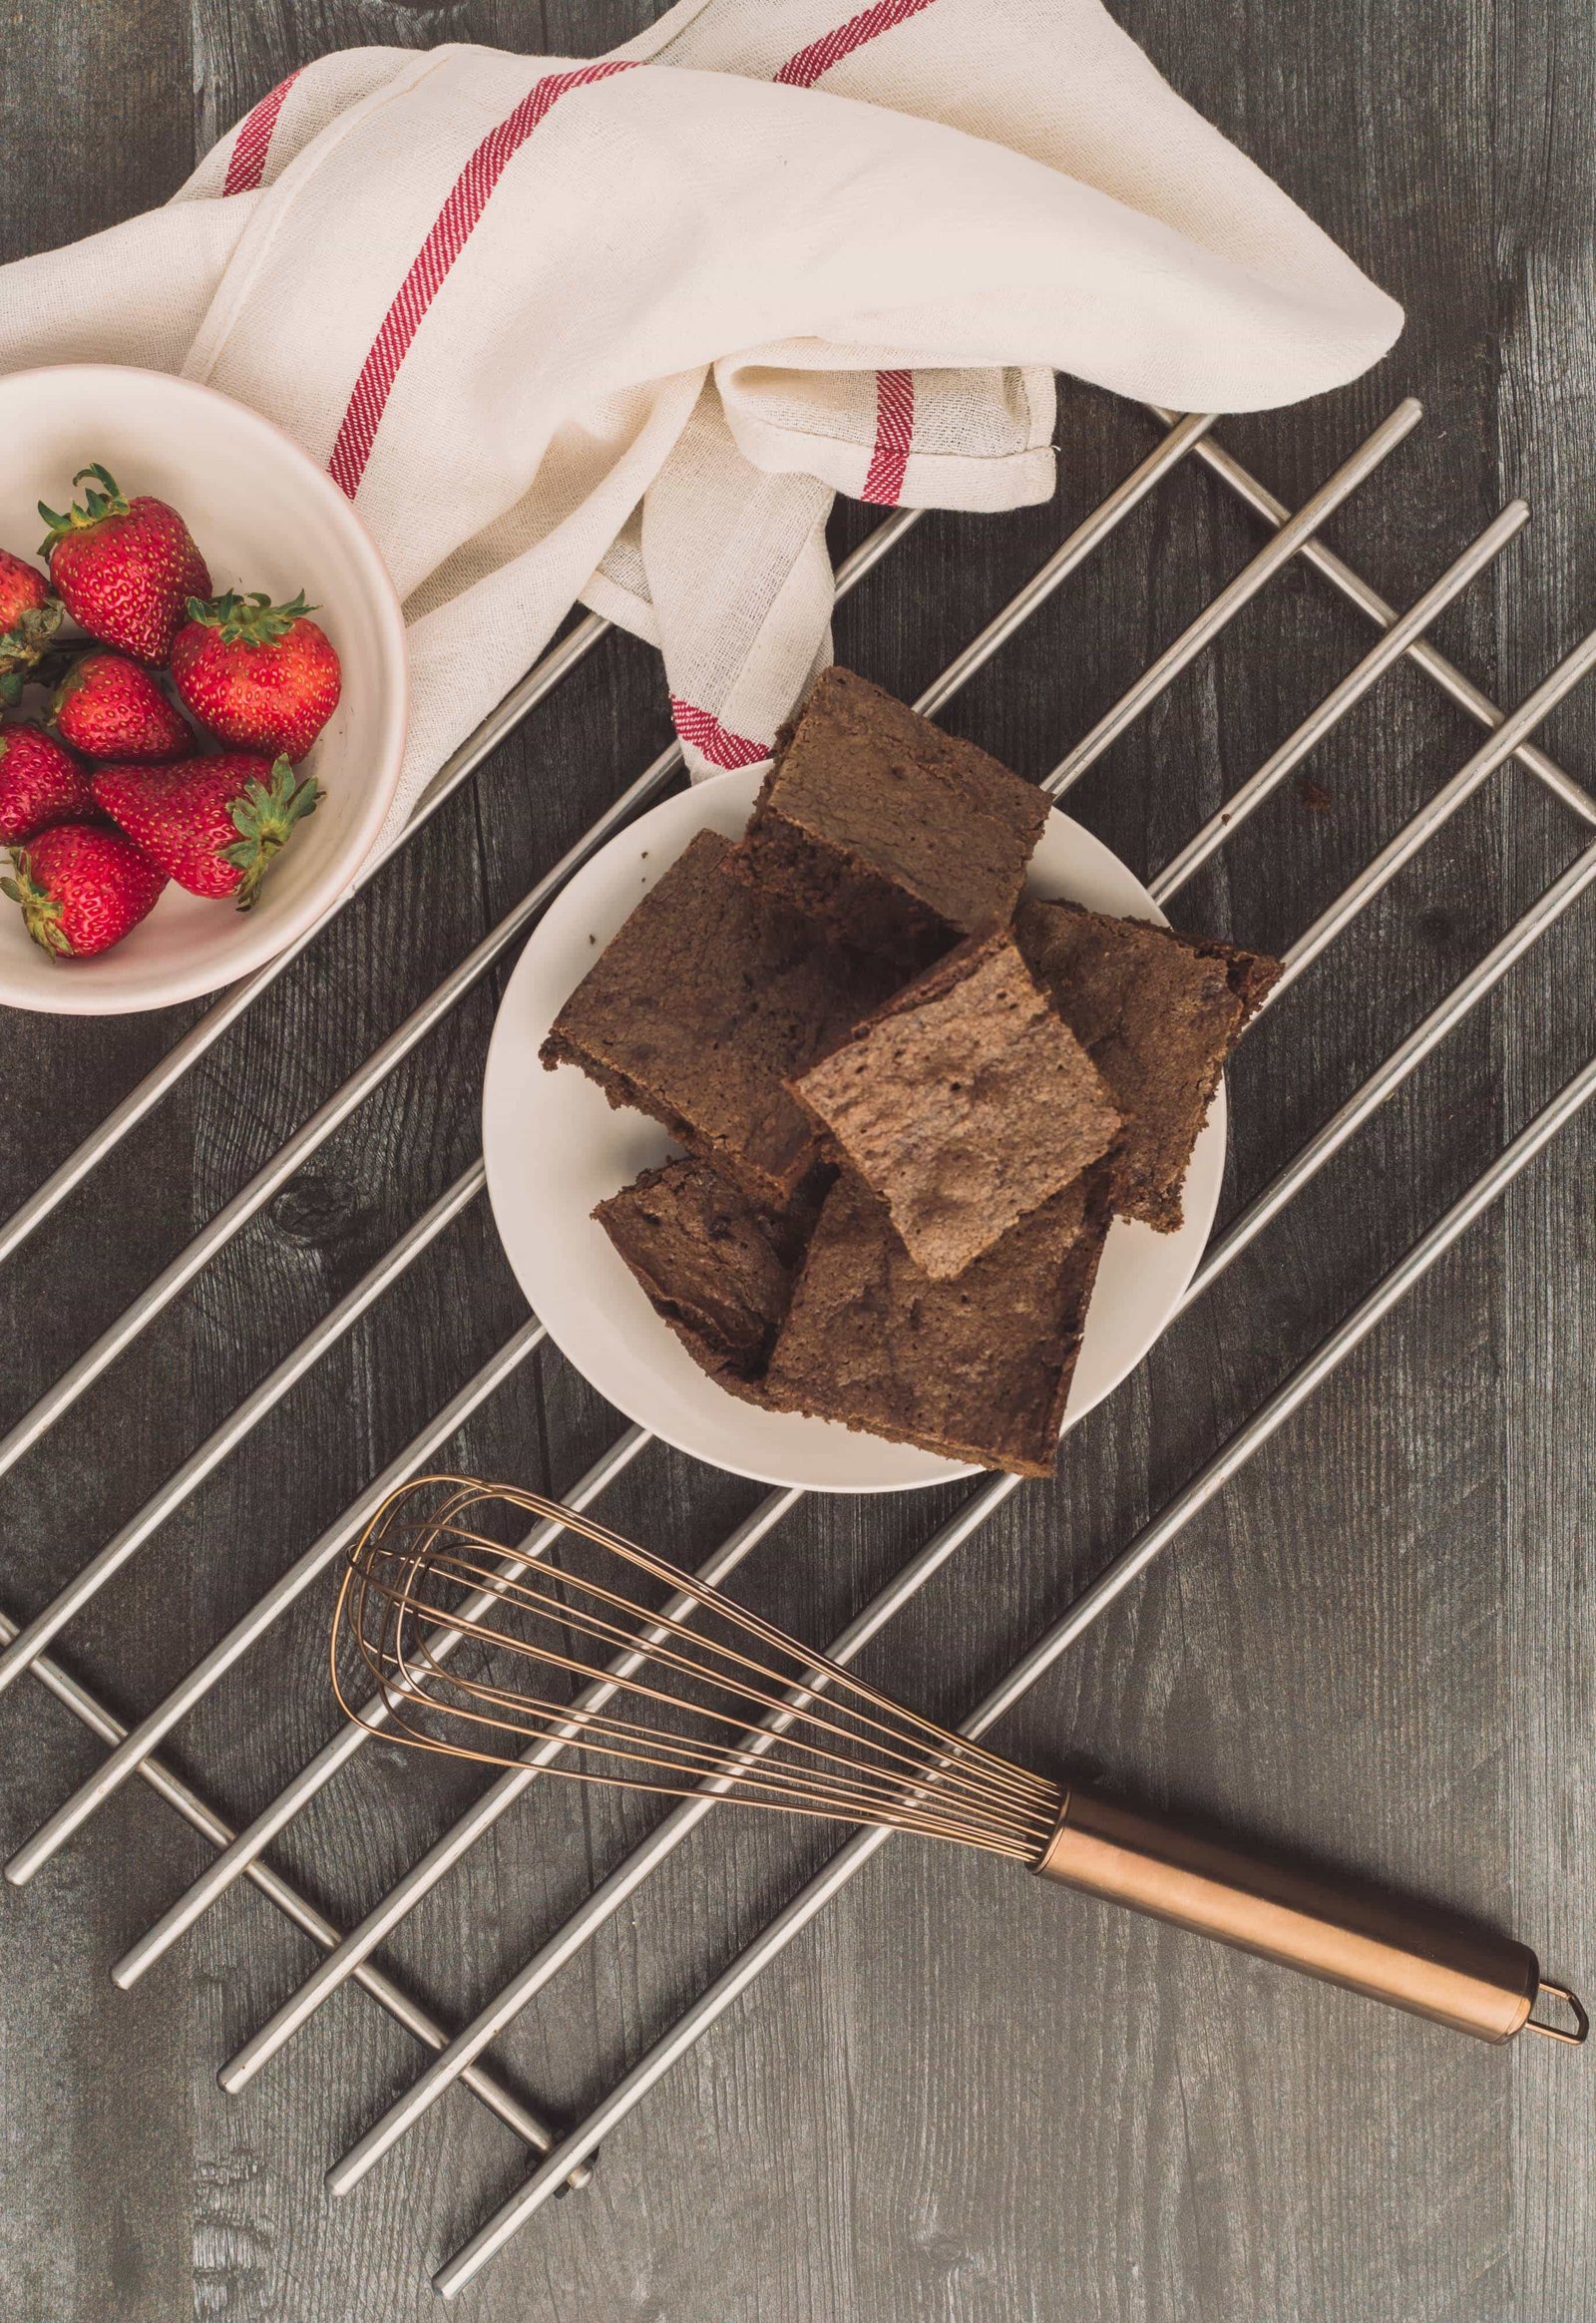 Atelier21 Co - Brownies with Strawberries-010